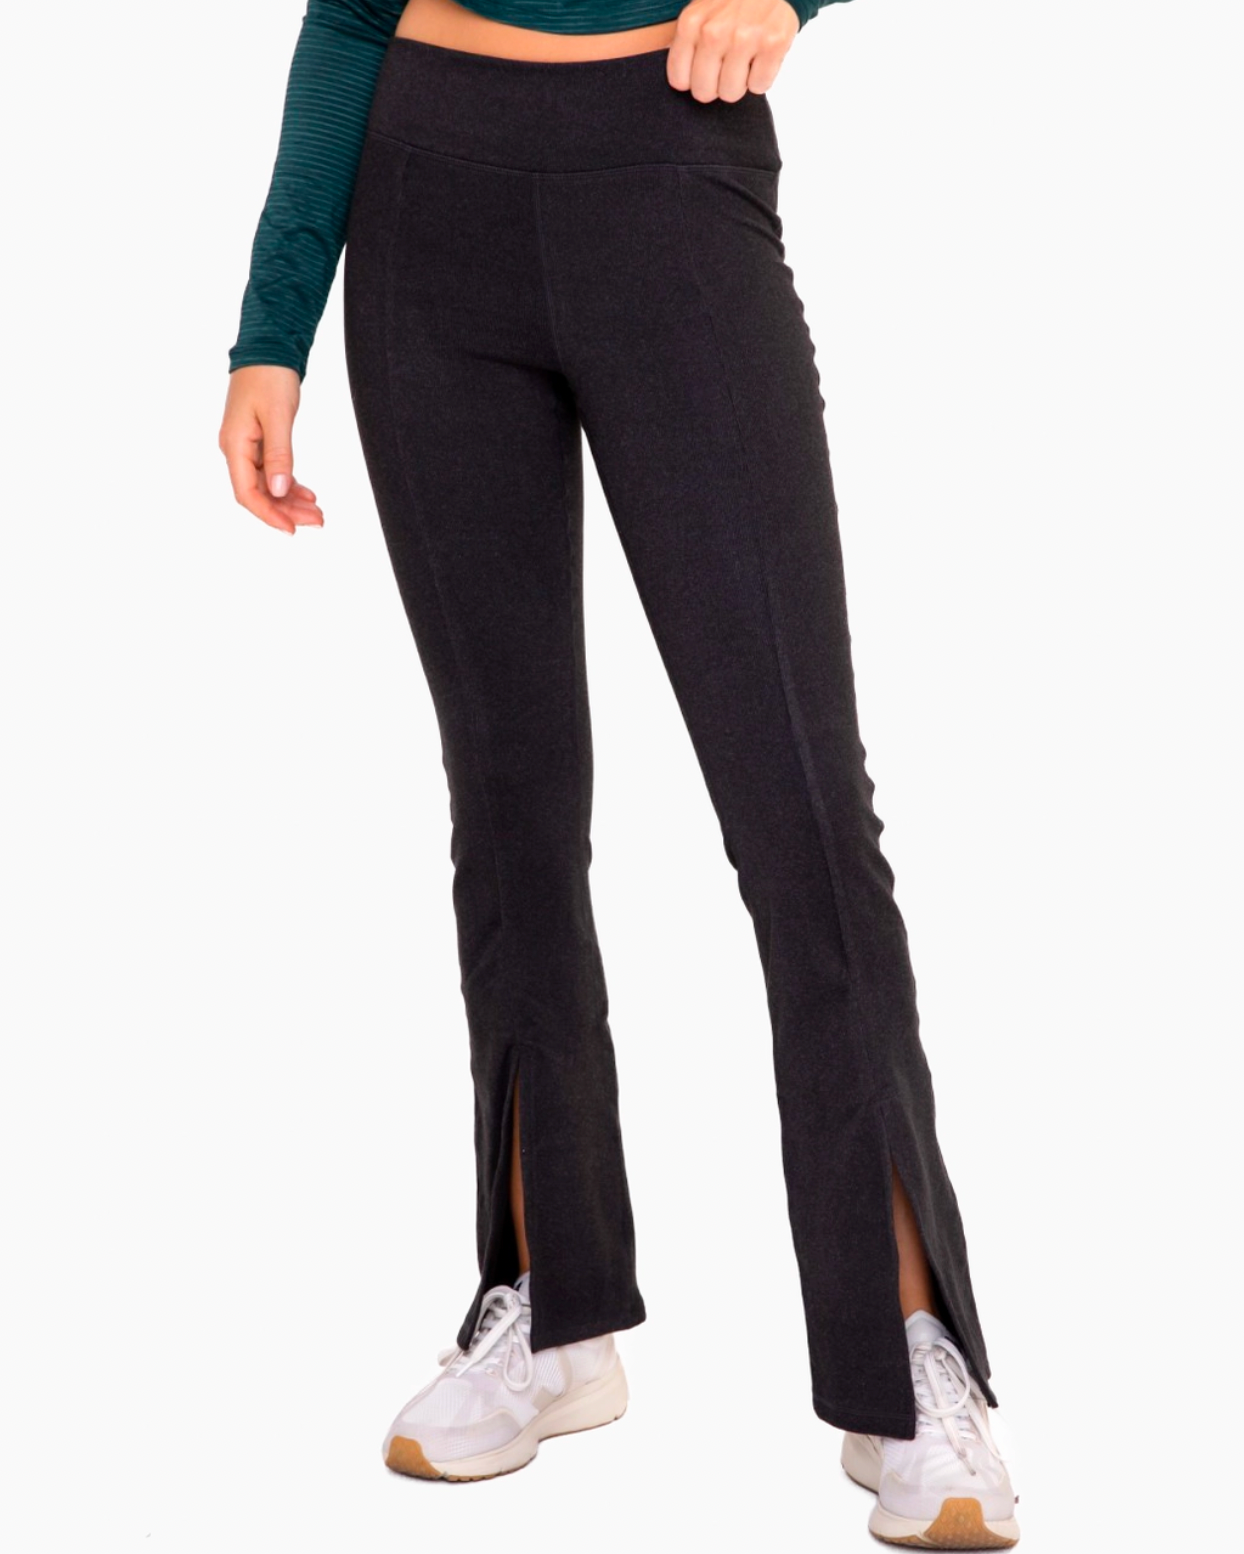 Model wearing Mono B Ribbed Flare Leggings wearing white sneakers and green shirt on a white background